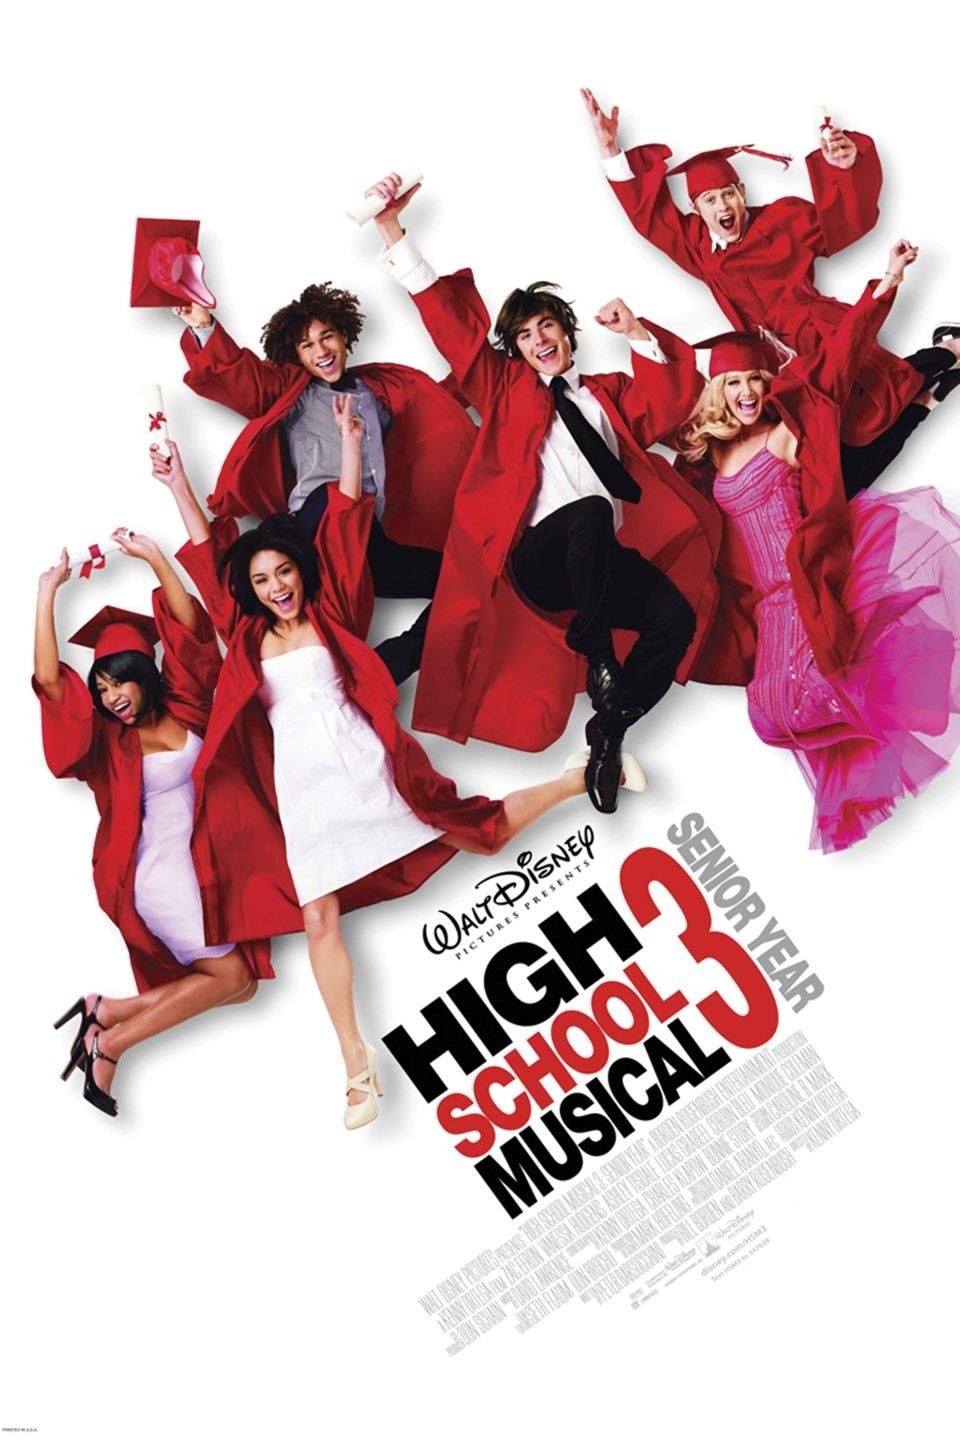 High School Musical: 3-Movie Collection [DVD] - Best Buy